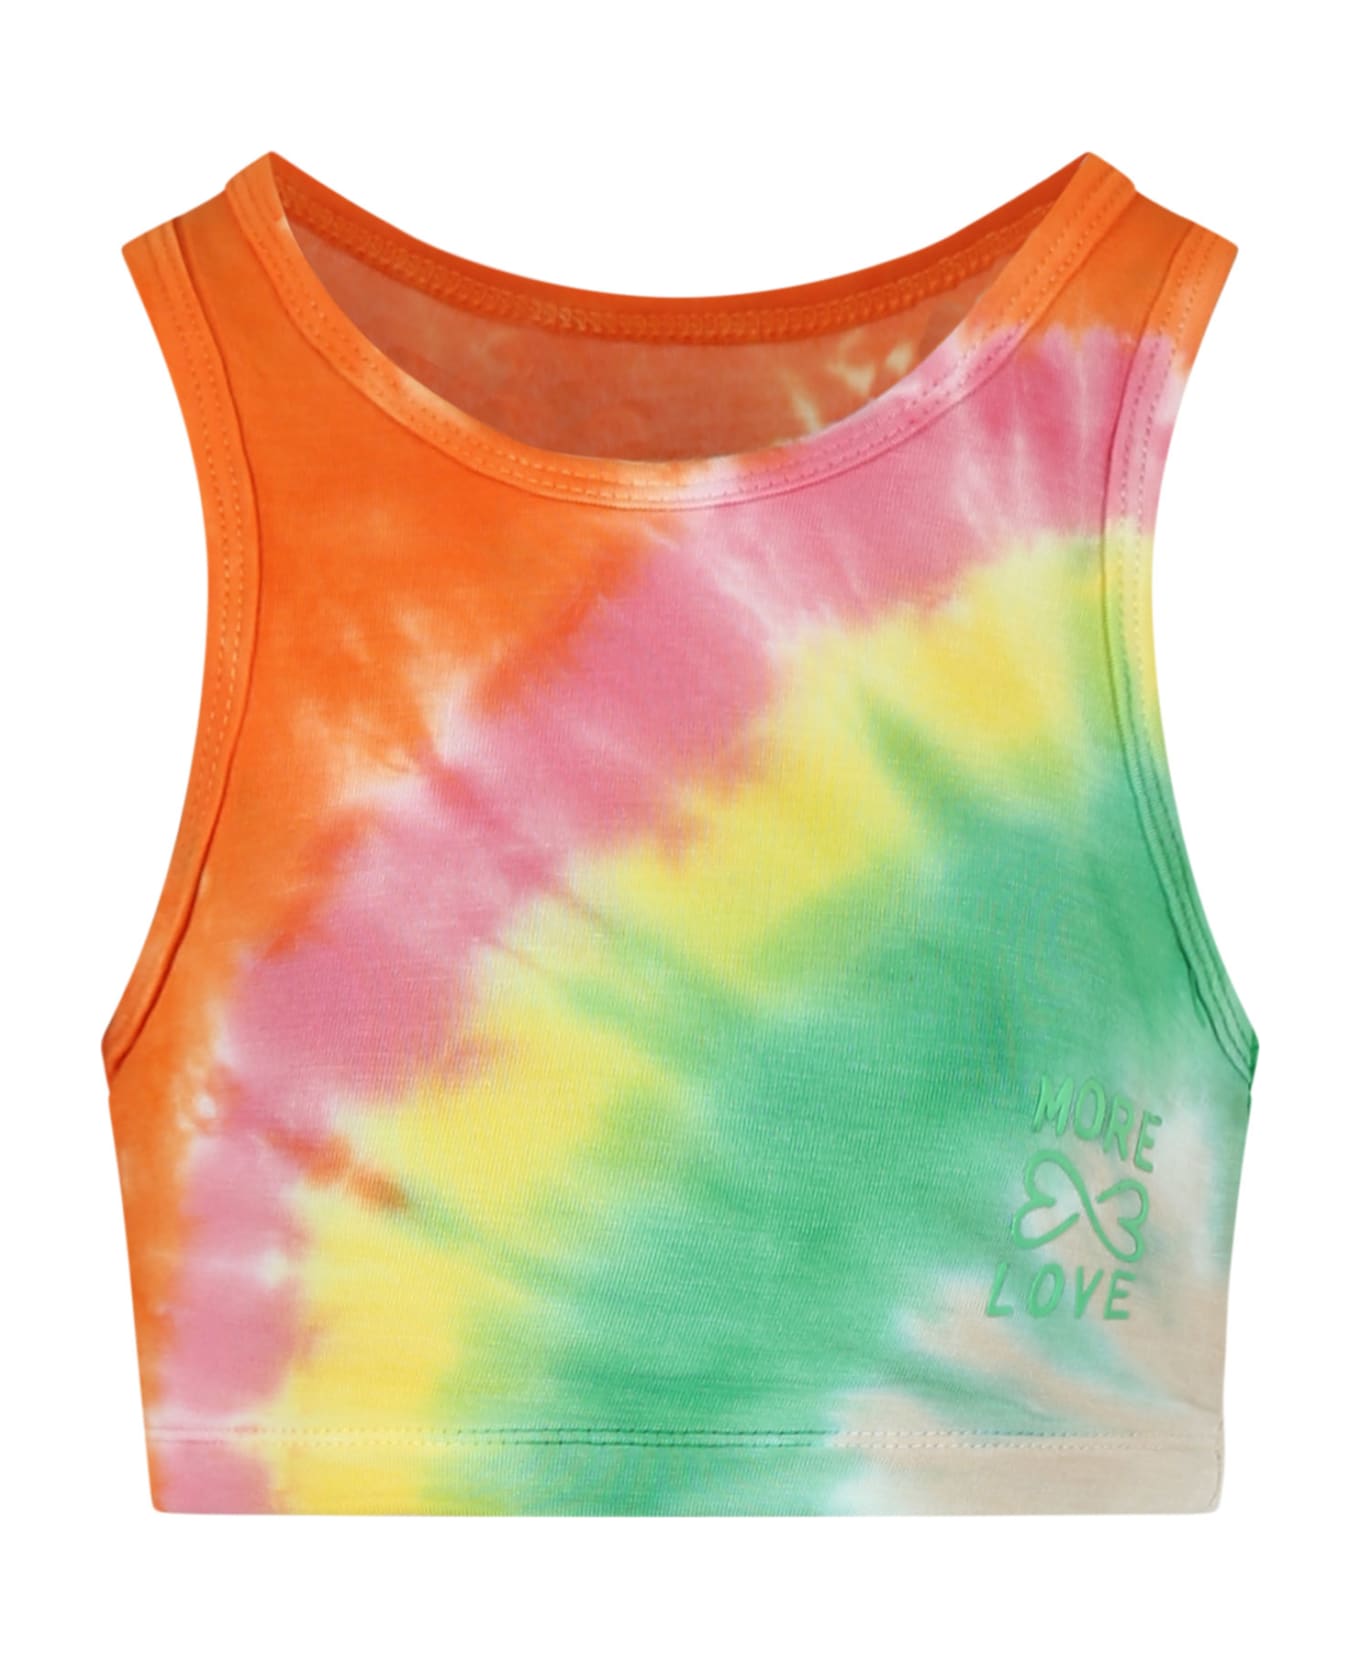 Molo Orange Tank Top For Girl With Writing - Multicolor